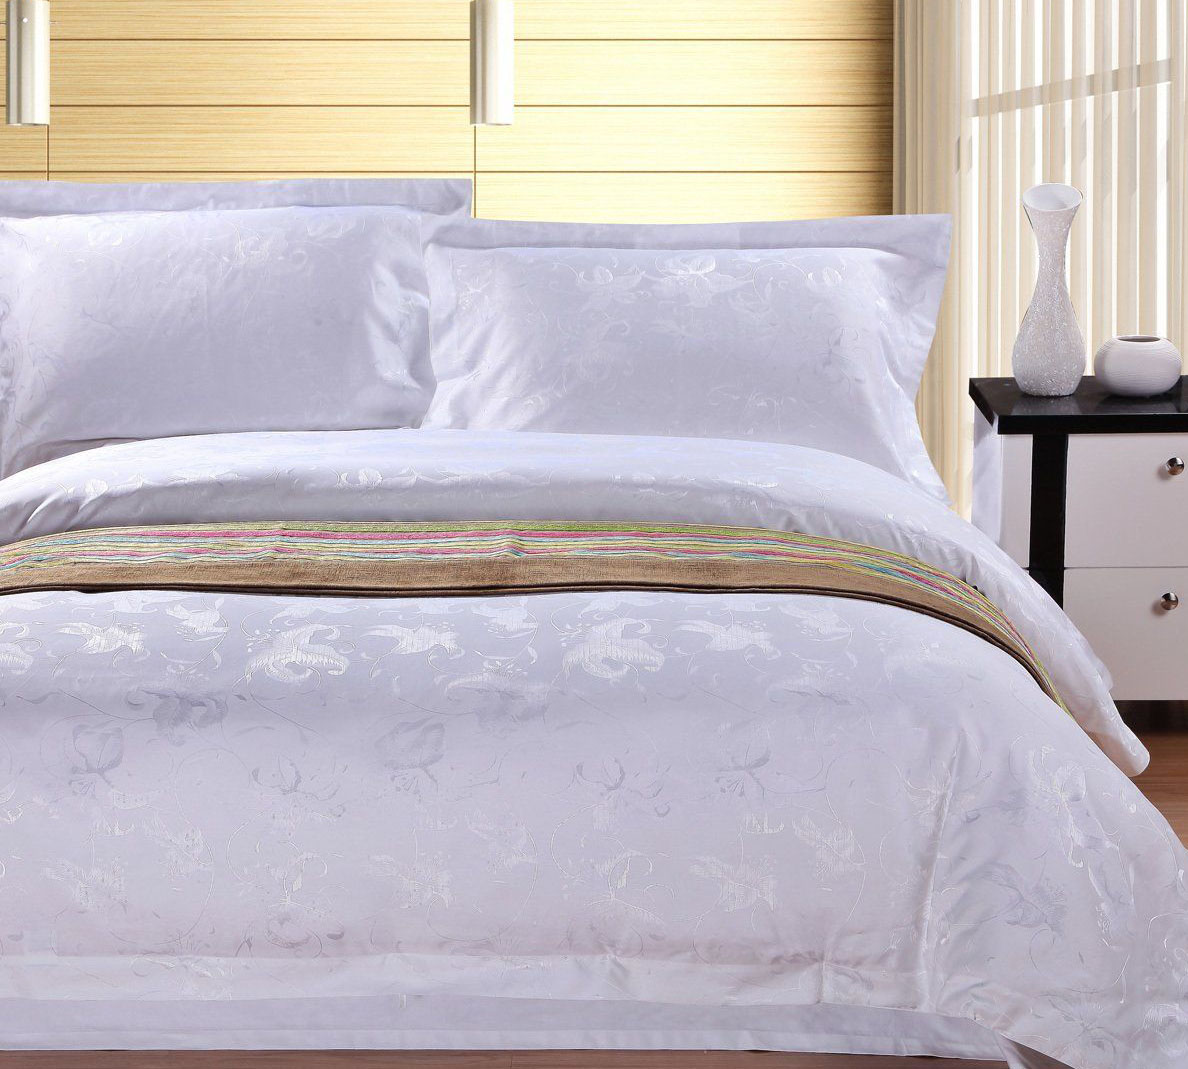 bleached white/dyed sateen/satin duvet covers for hotel